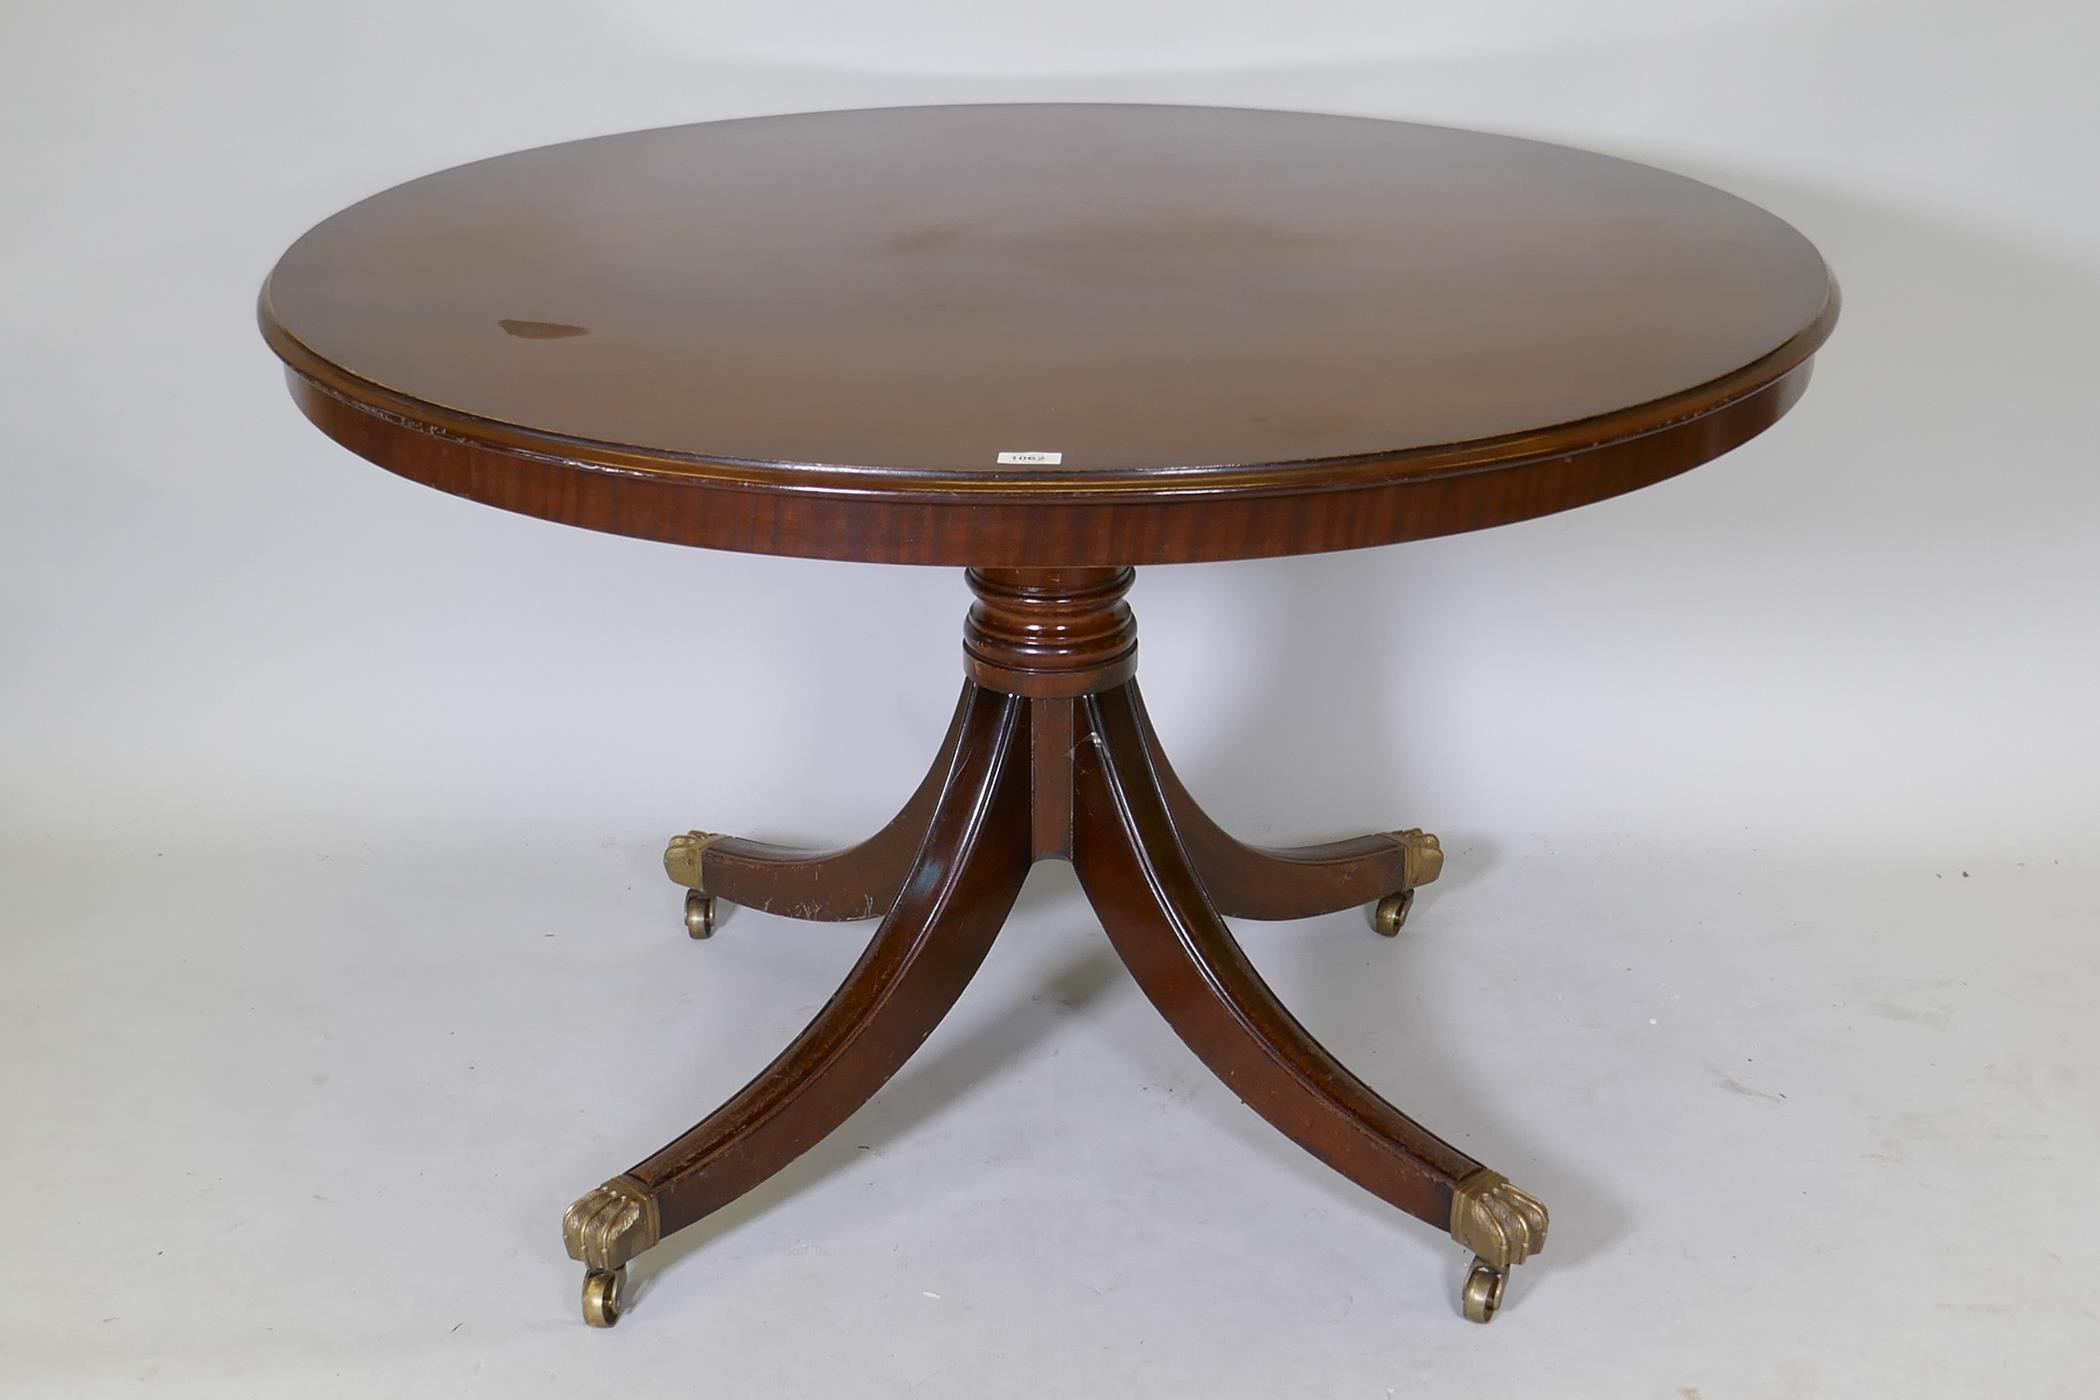 A Regency style mahogany centre/breakfast table with solid top, raised on a turned column with splay